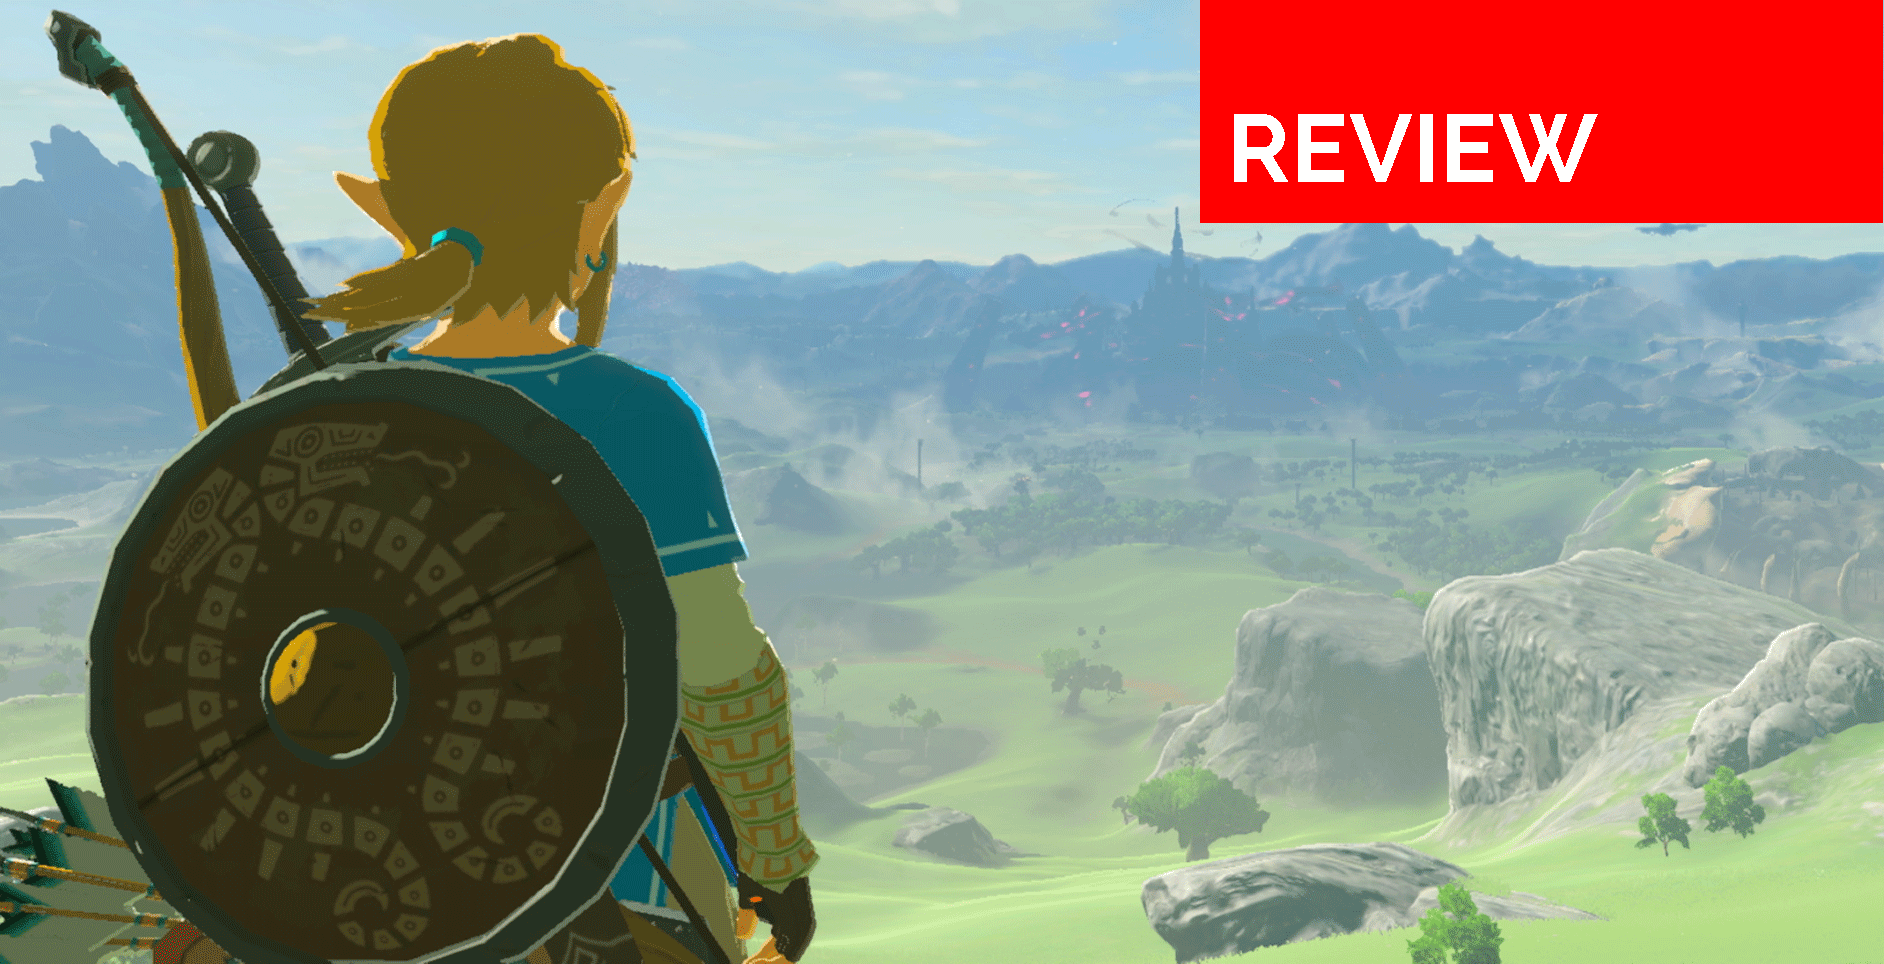 The Legend Of Zelda: Breath Of The Wild Review - The Grandest